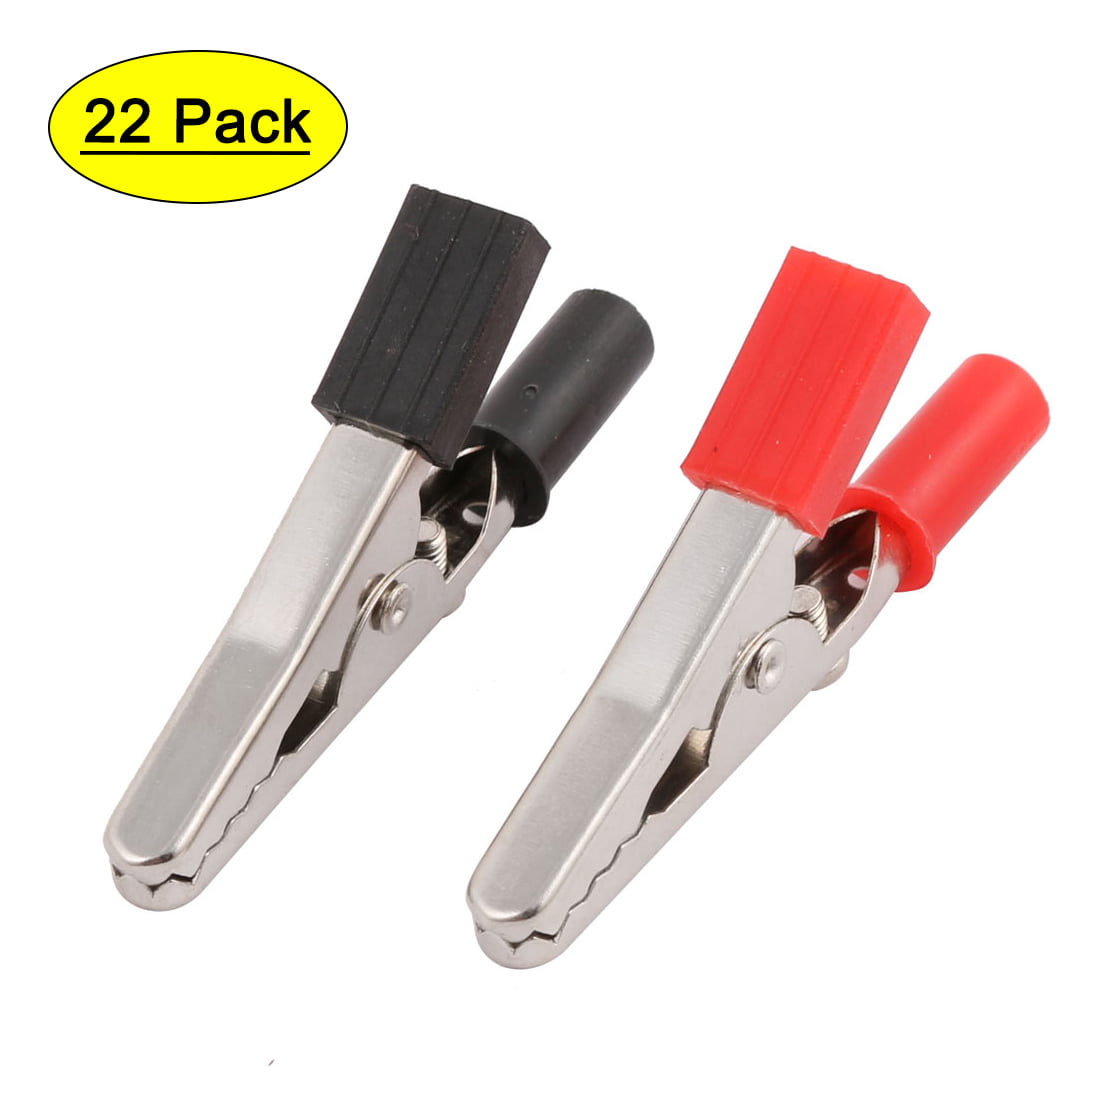 Probe Crocodile Battery Test Electrical Clip Clamps 55mm 5A 100A Alligator Clips 